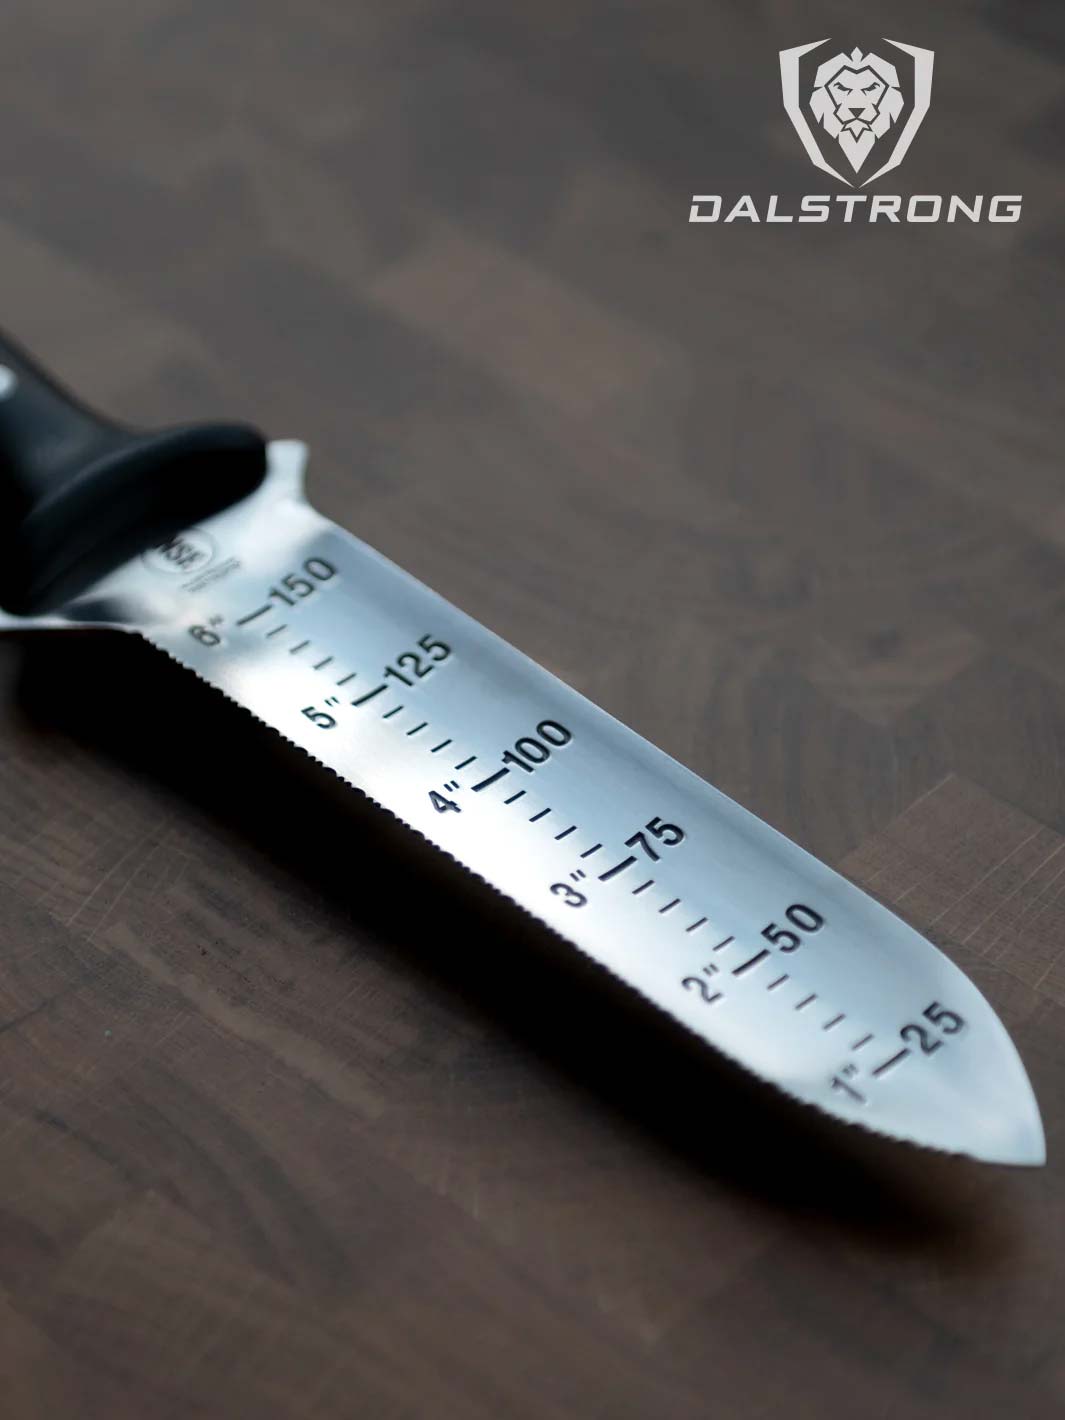 Dalstrong gladiator series 6.5 inch hori hori knife with black handle showcasing it's measurements along the blade.